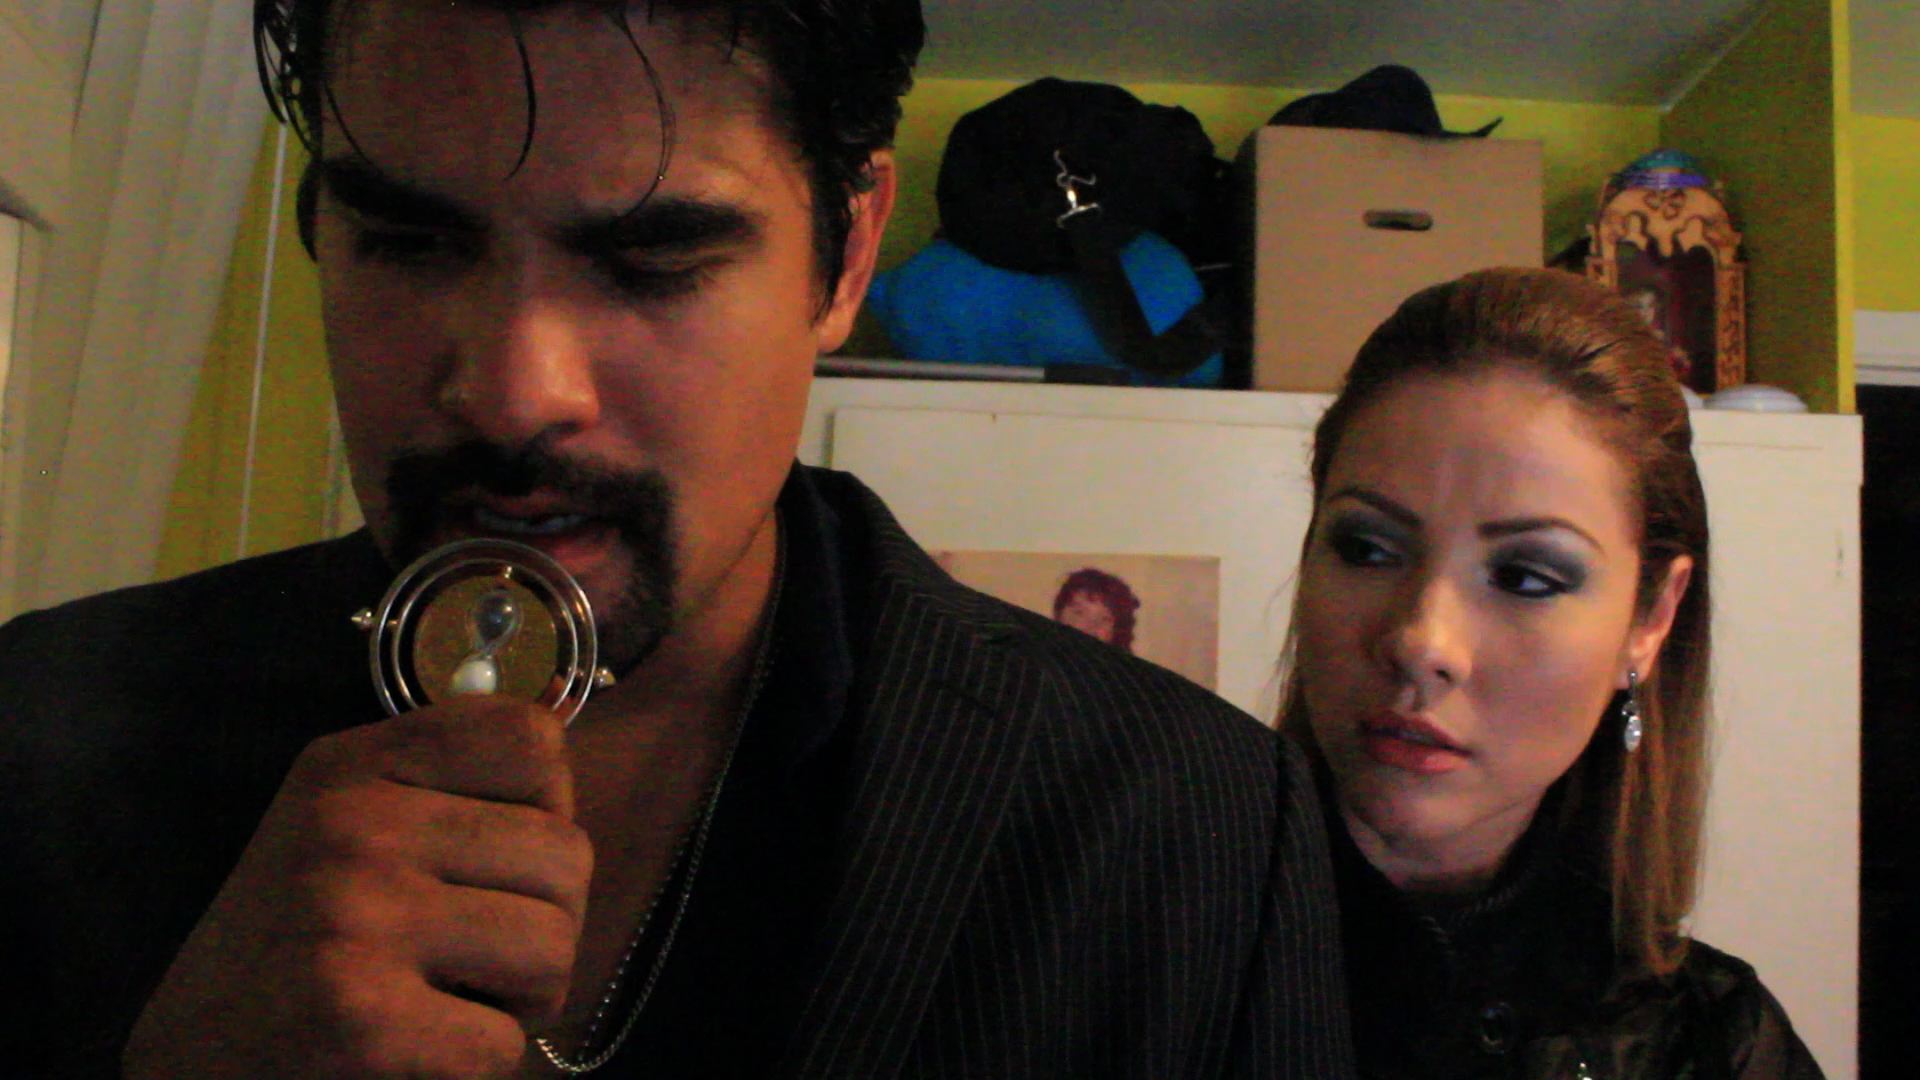 David Cid (Robert) debates in his mind if he should give his wife's necklace to Delora, played by Lisa May in the up coming film 